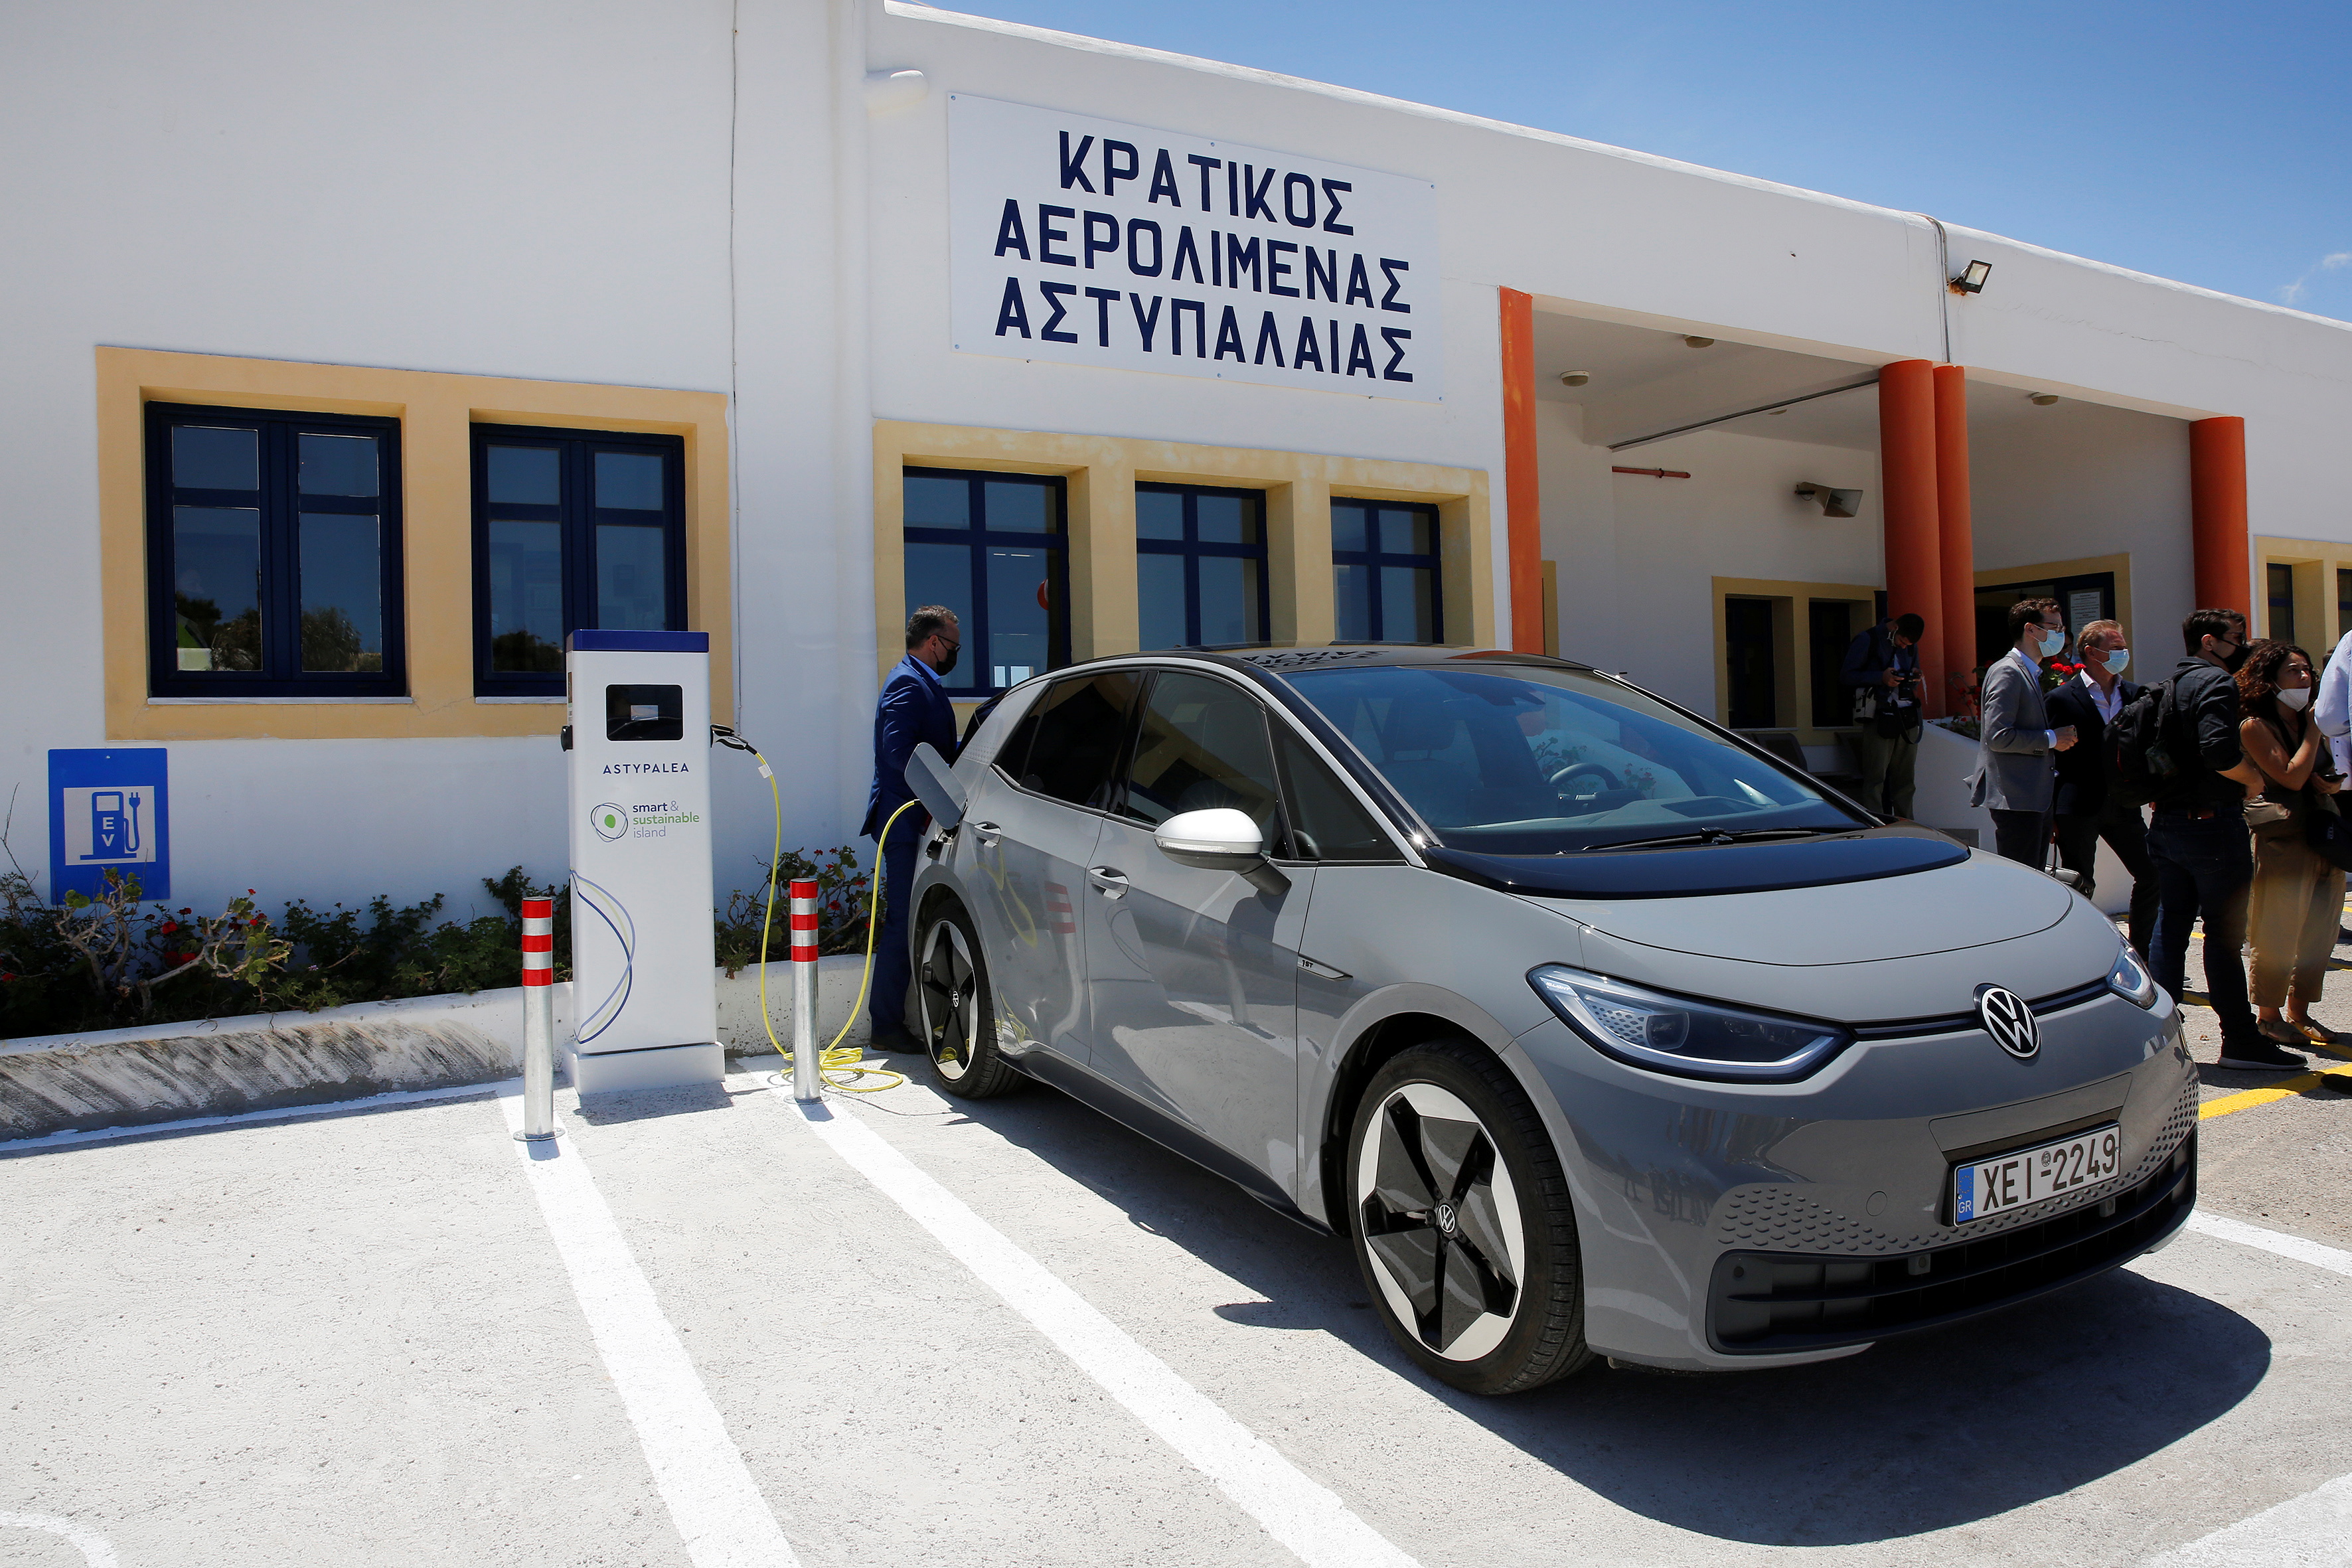 Charging a Volkswagen ID.4 electric car at the airport on the island of Astypalea